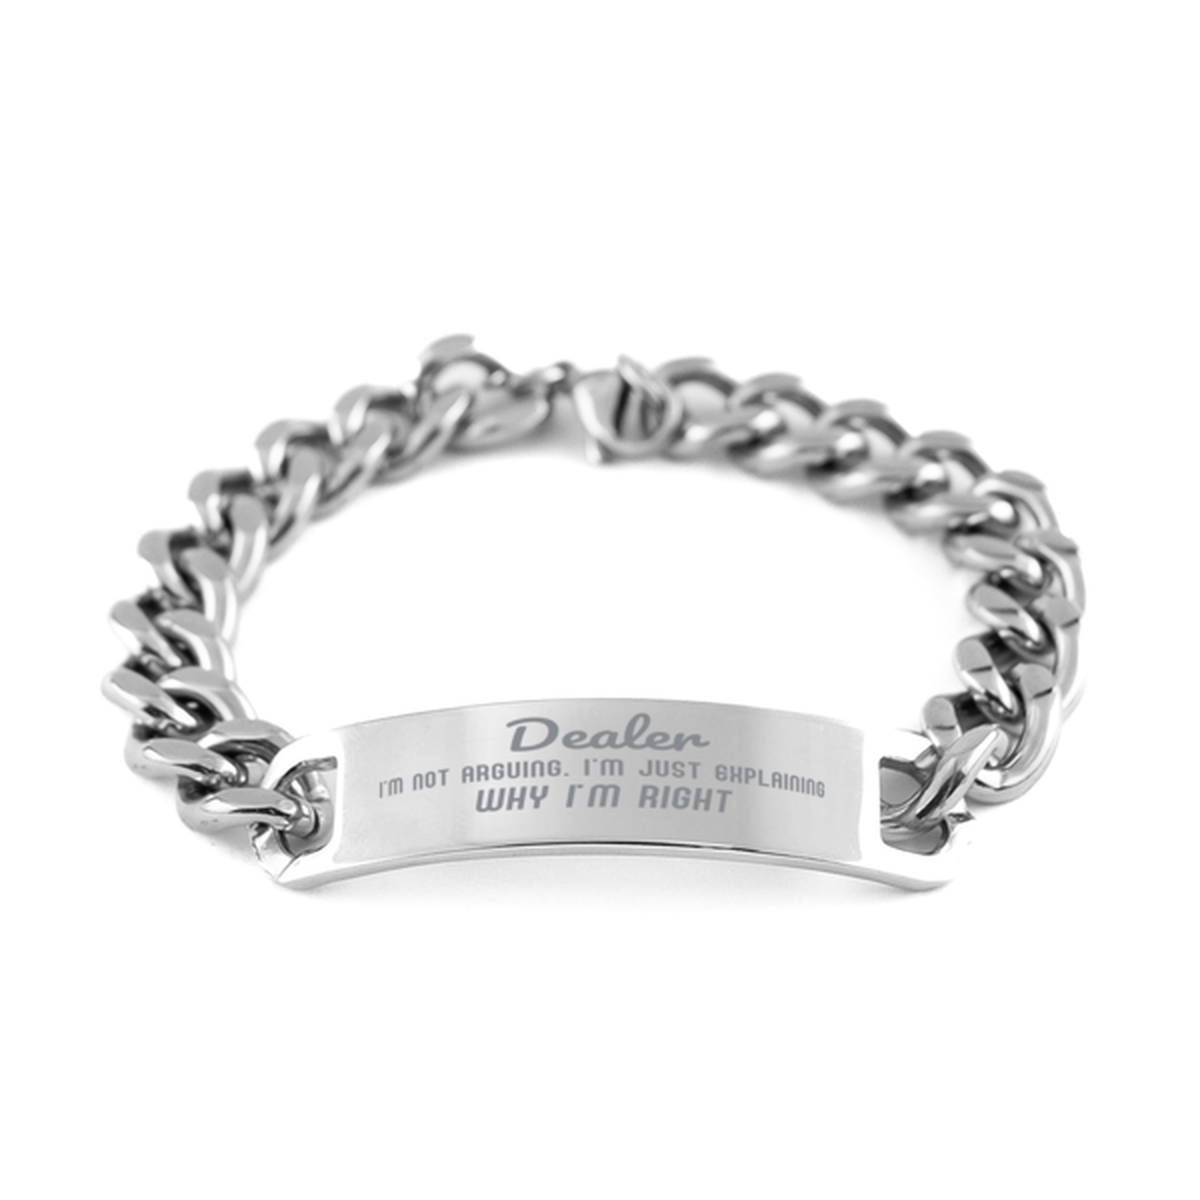 Dealer I'm not Arguing. I'm Just Explaining Why I'm RIGHT Cuban Chain Stainless Steel Bracelet, Graduation Birthday Christmas Dealer Gifts For Dealer Funny Saying Quote Present for Men Women Coworker